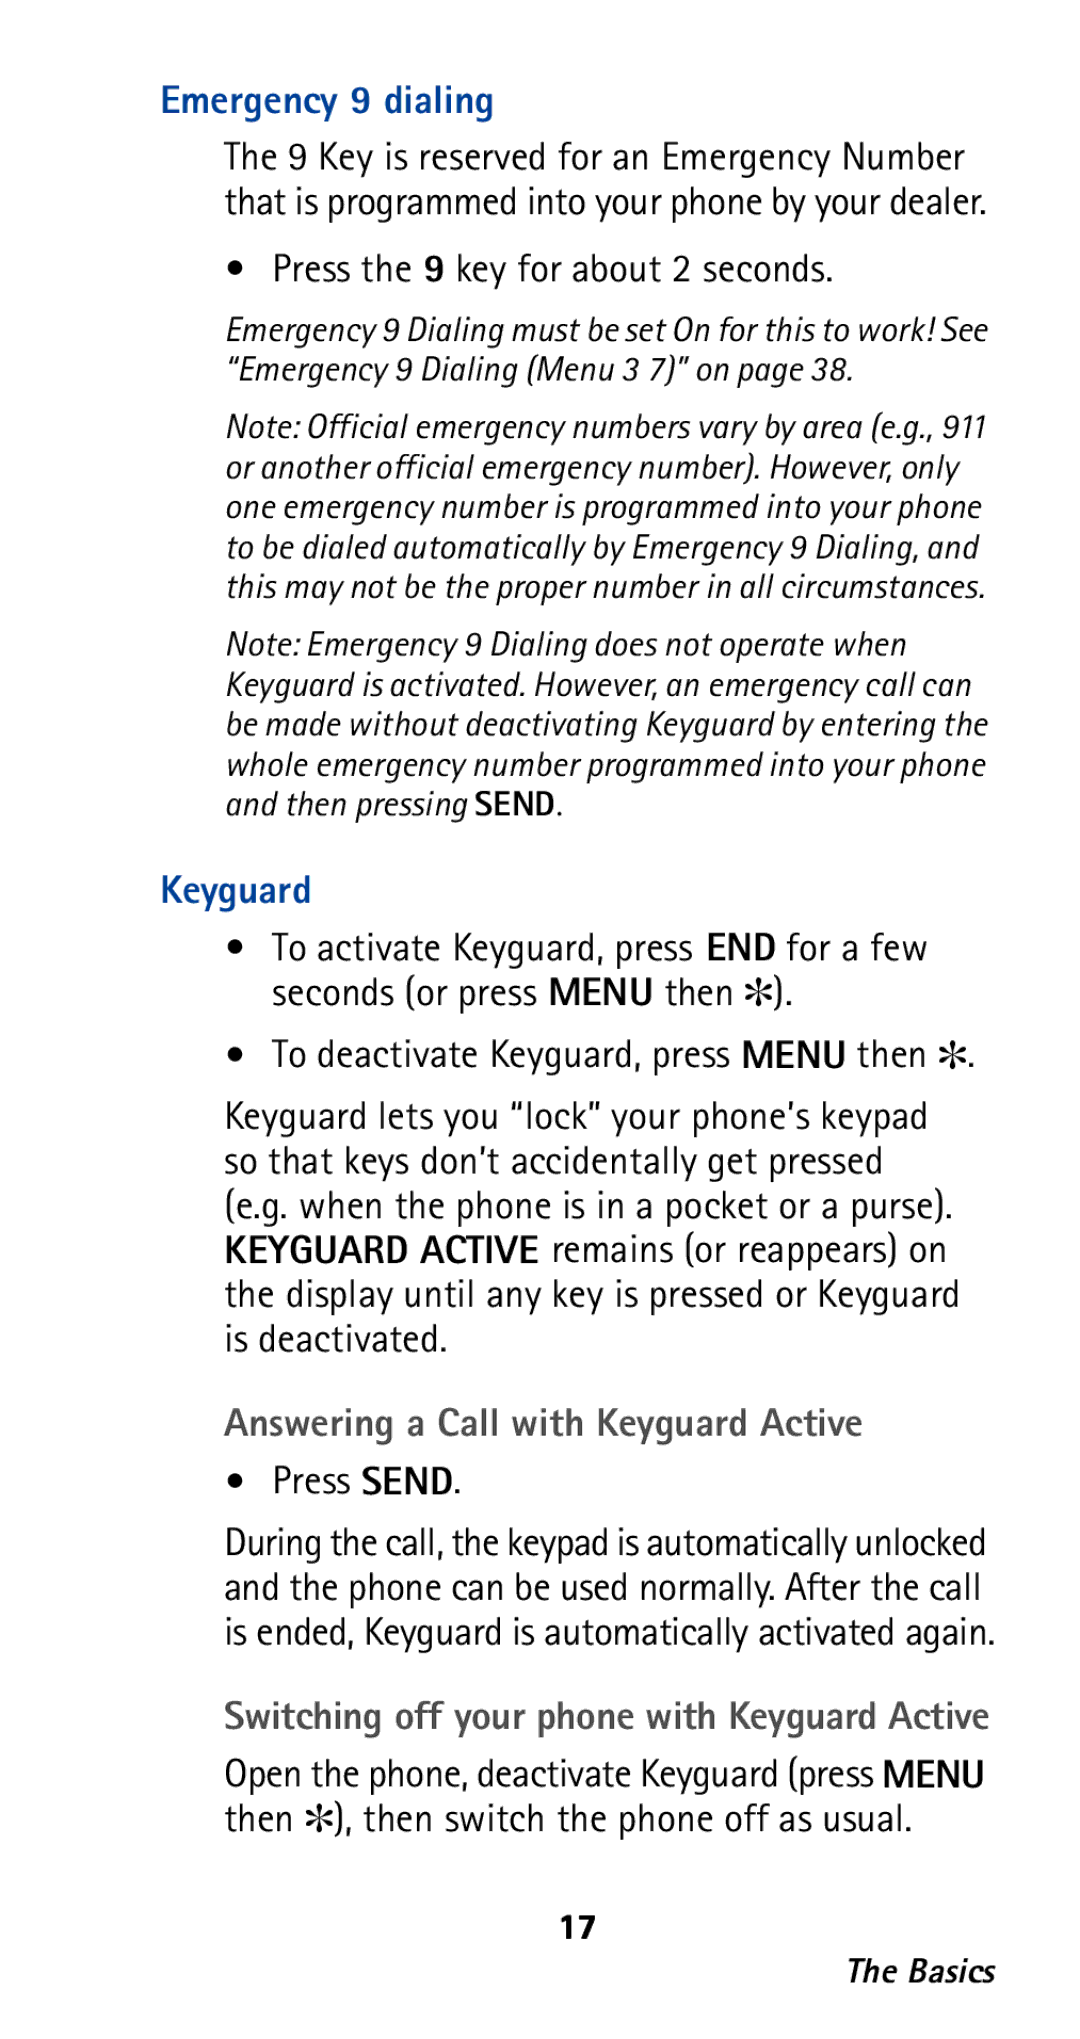 Nokia 282 Emergency 9 dialing, Press the 9 key for about 2 seconds, Answering a Call with Keyguard Active, Press Send 